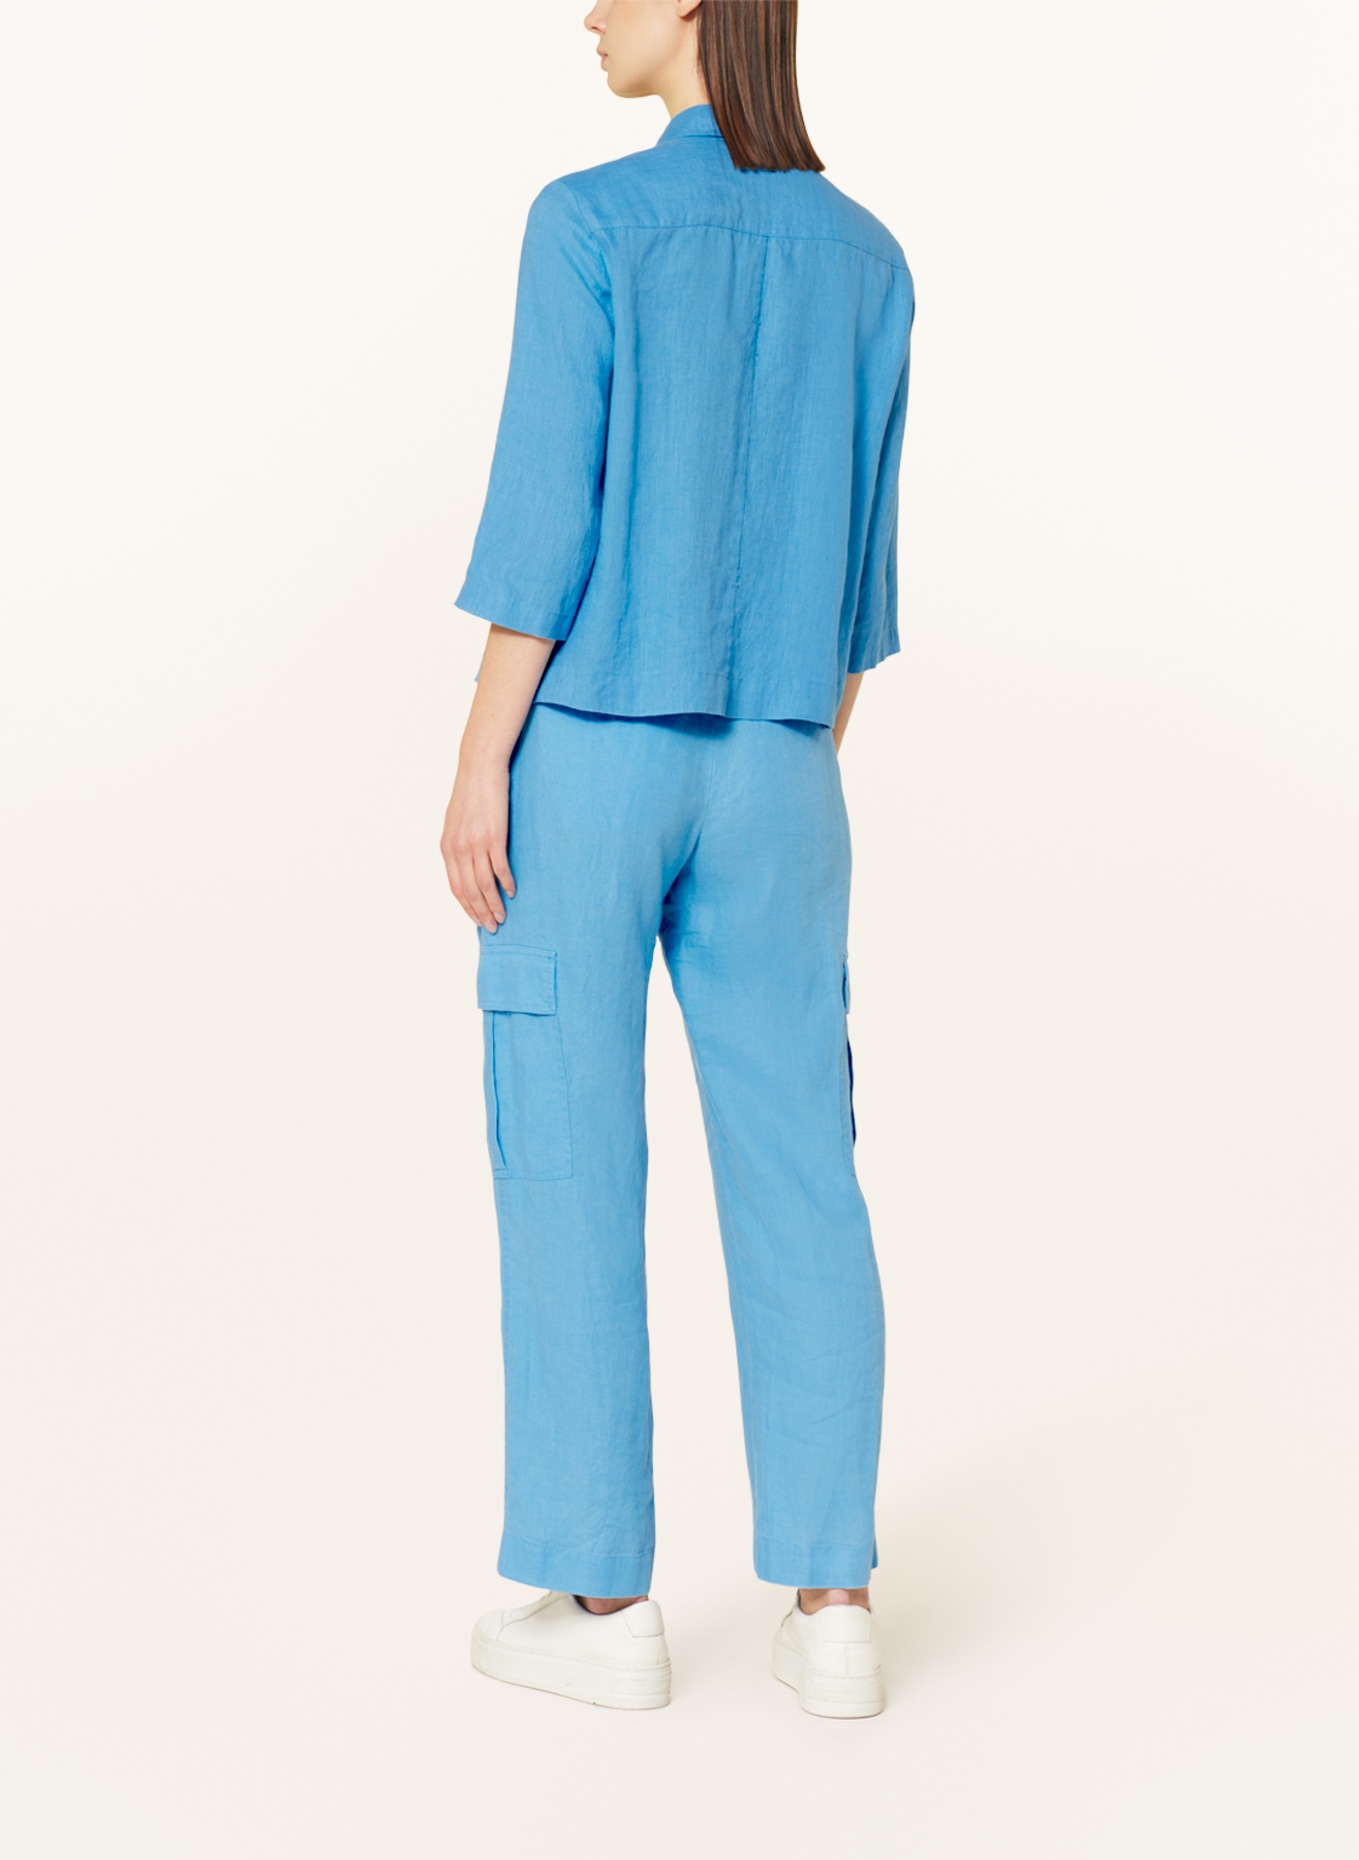 MARC AUREL Shirt blouse made of linen with 3/4 sleeves, Color: BLUE (Image 3)